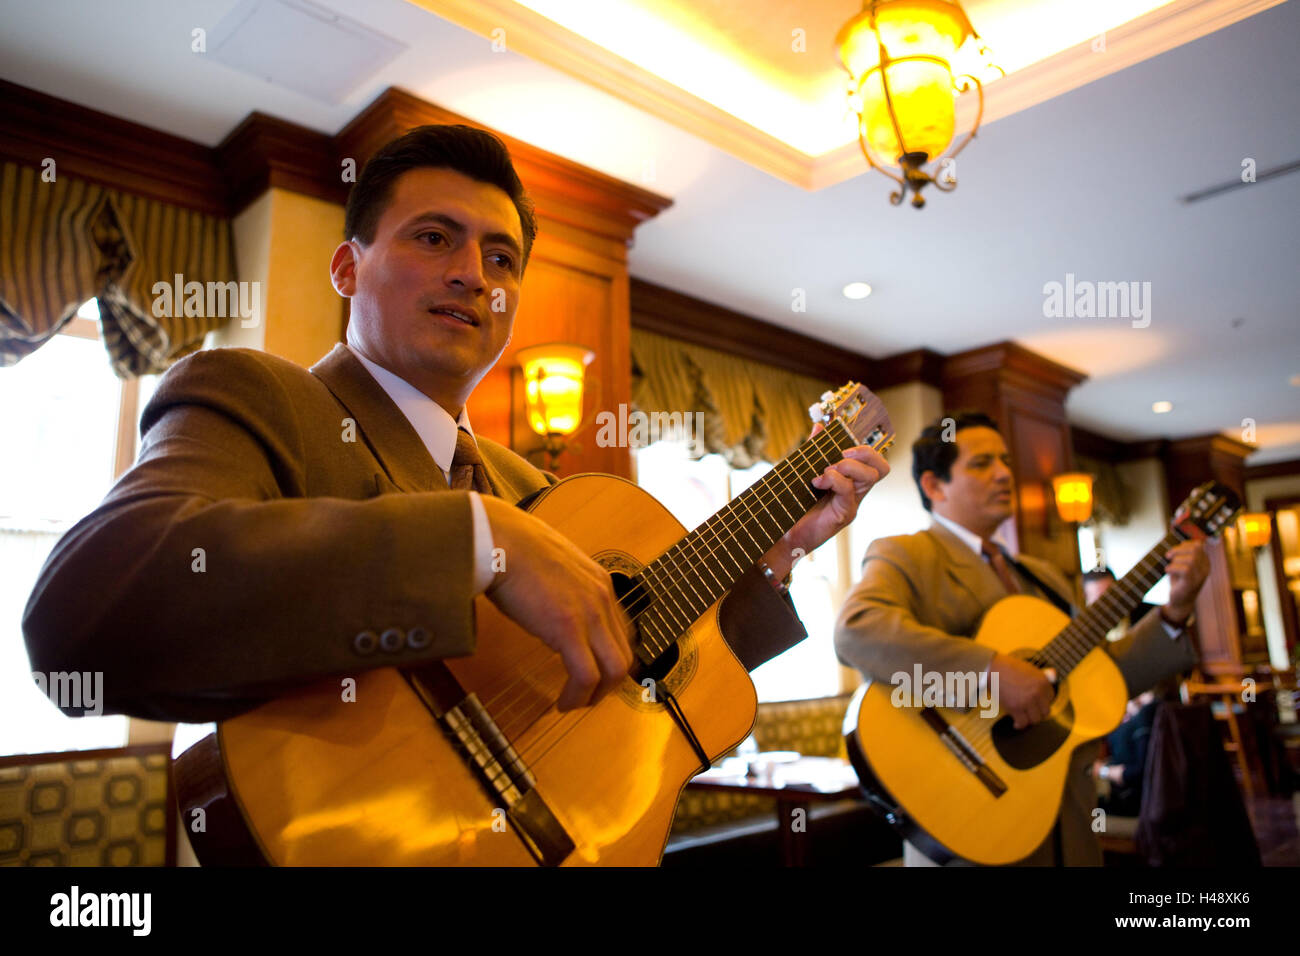 Ecuador, province Pichincha, Quito, bar, musician, South America, town, capital, restaurant, inside, entertainment, music, men, South American Indians, guitars, guitar players, sing, there make music, locals, folklore, guitar, people, singers, tourism, Stock Photo